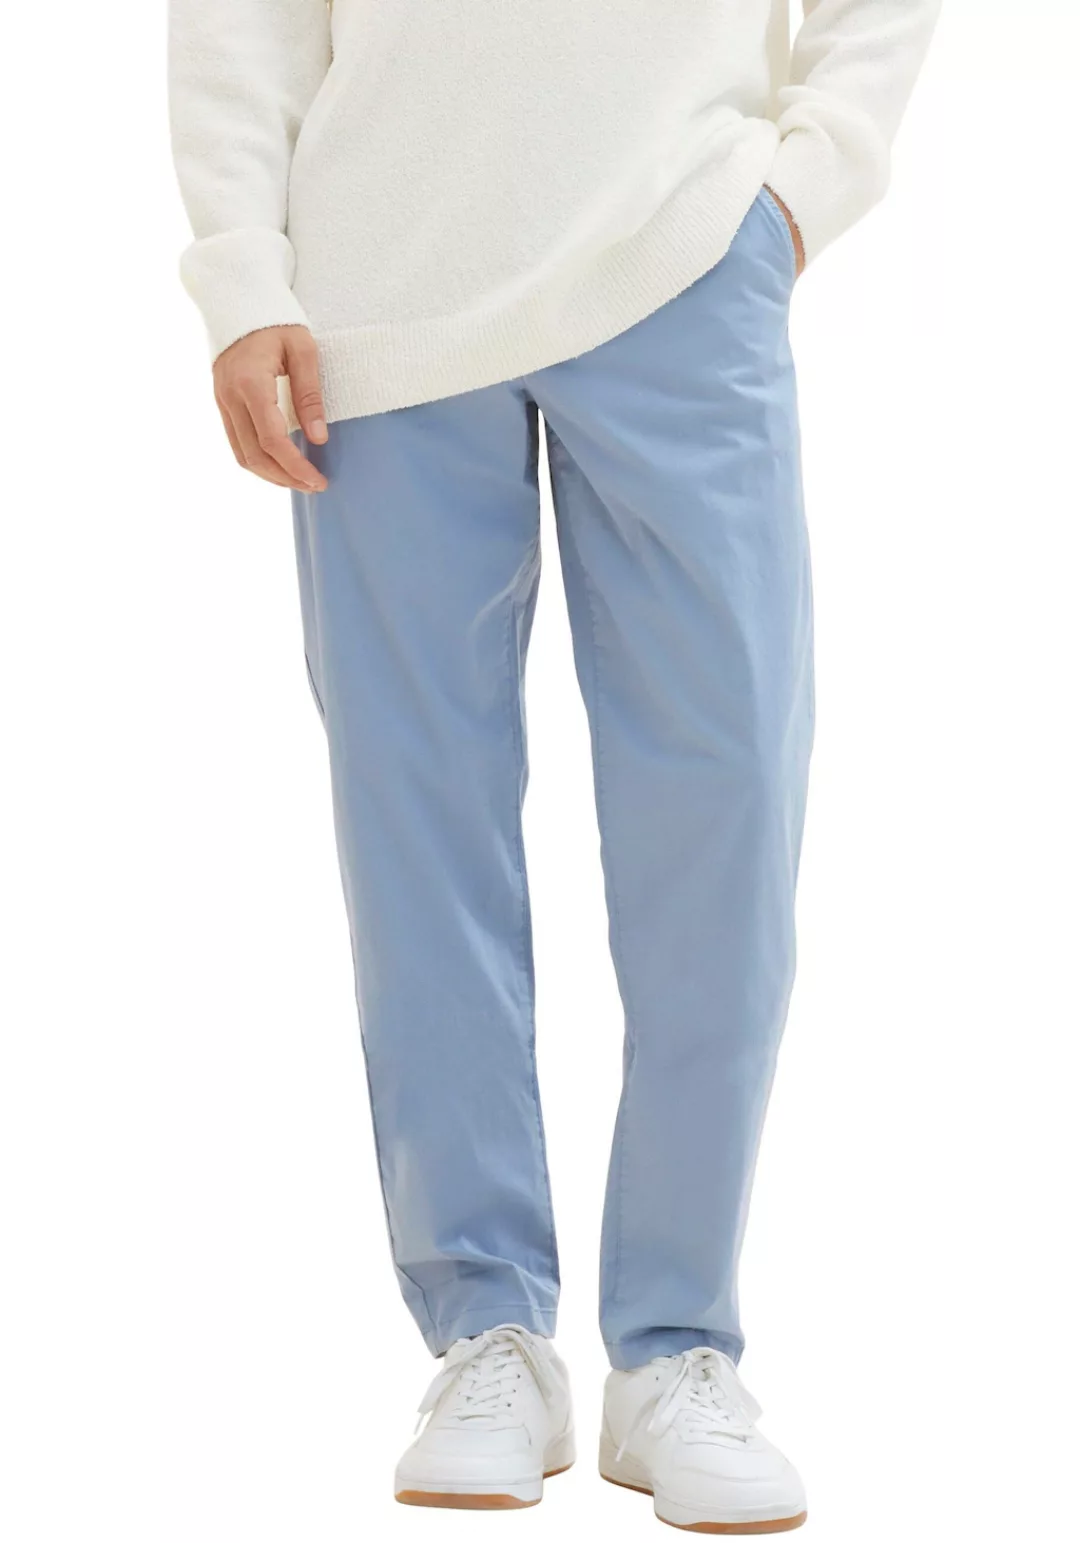 TOM TAILOR Chinohose Relaxed Tapered günstig online kaufen